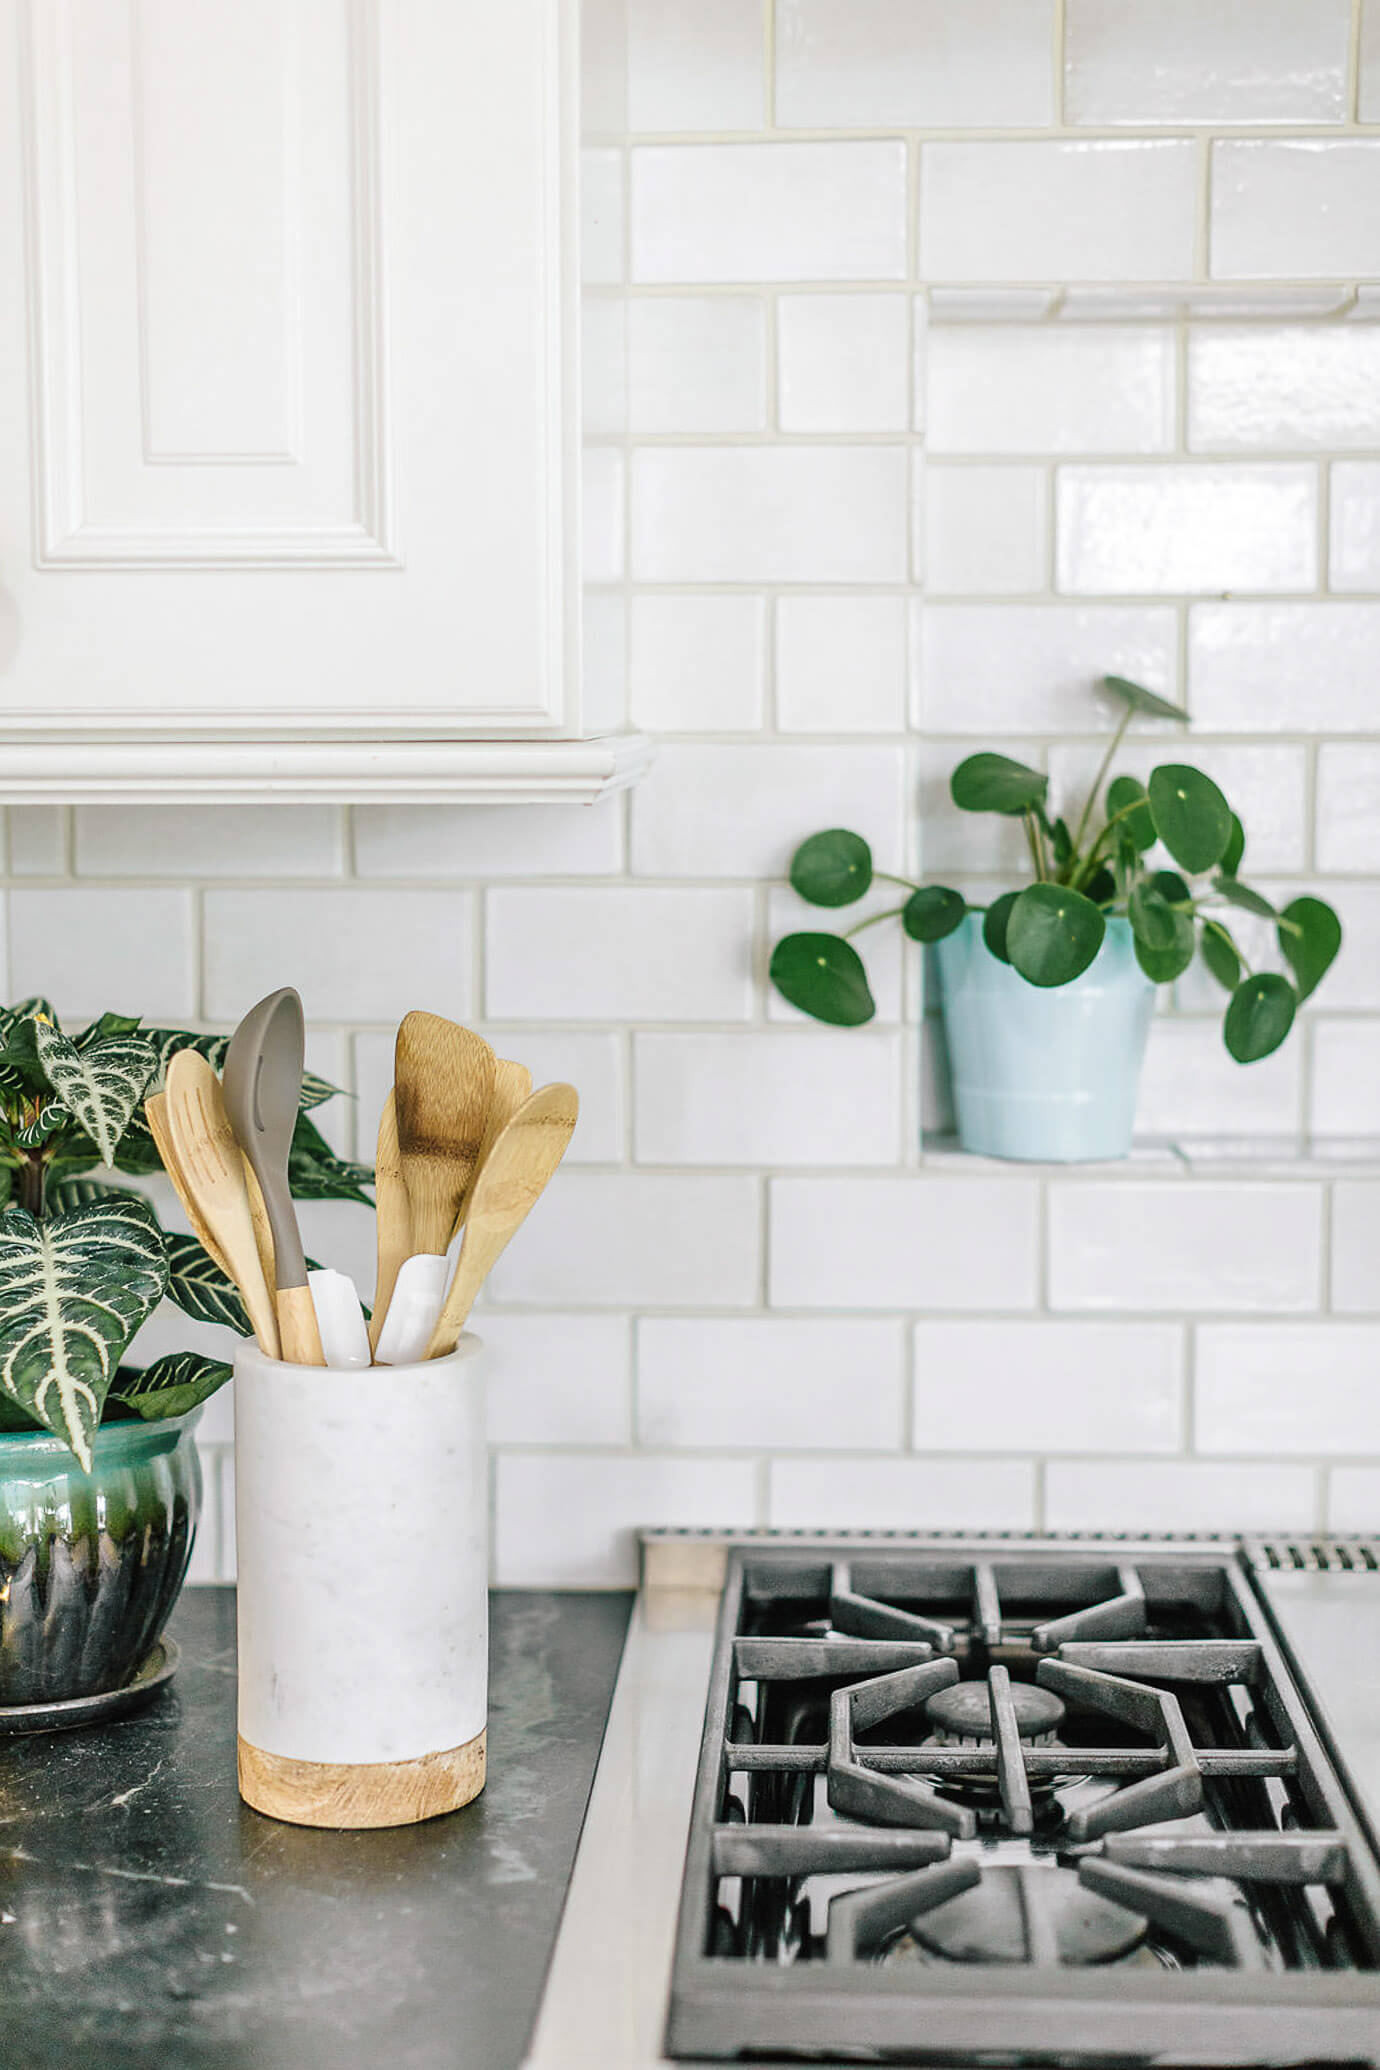 Kitchen stove-top with white subway tile and plants